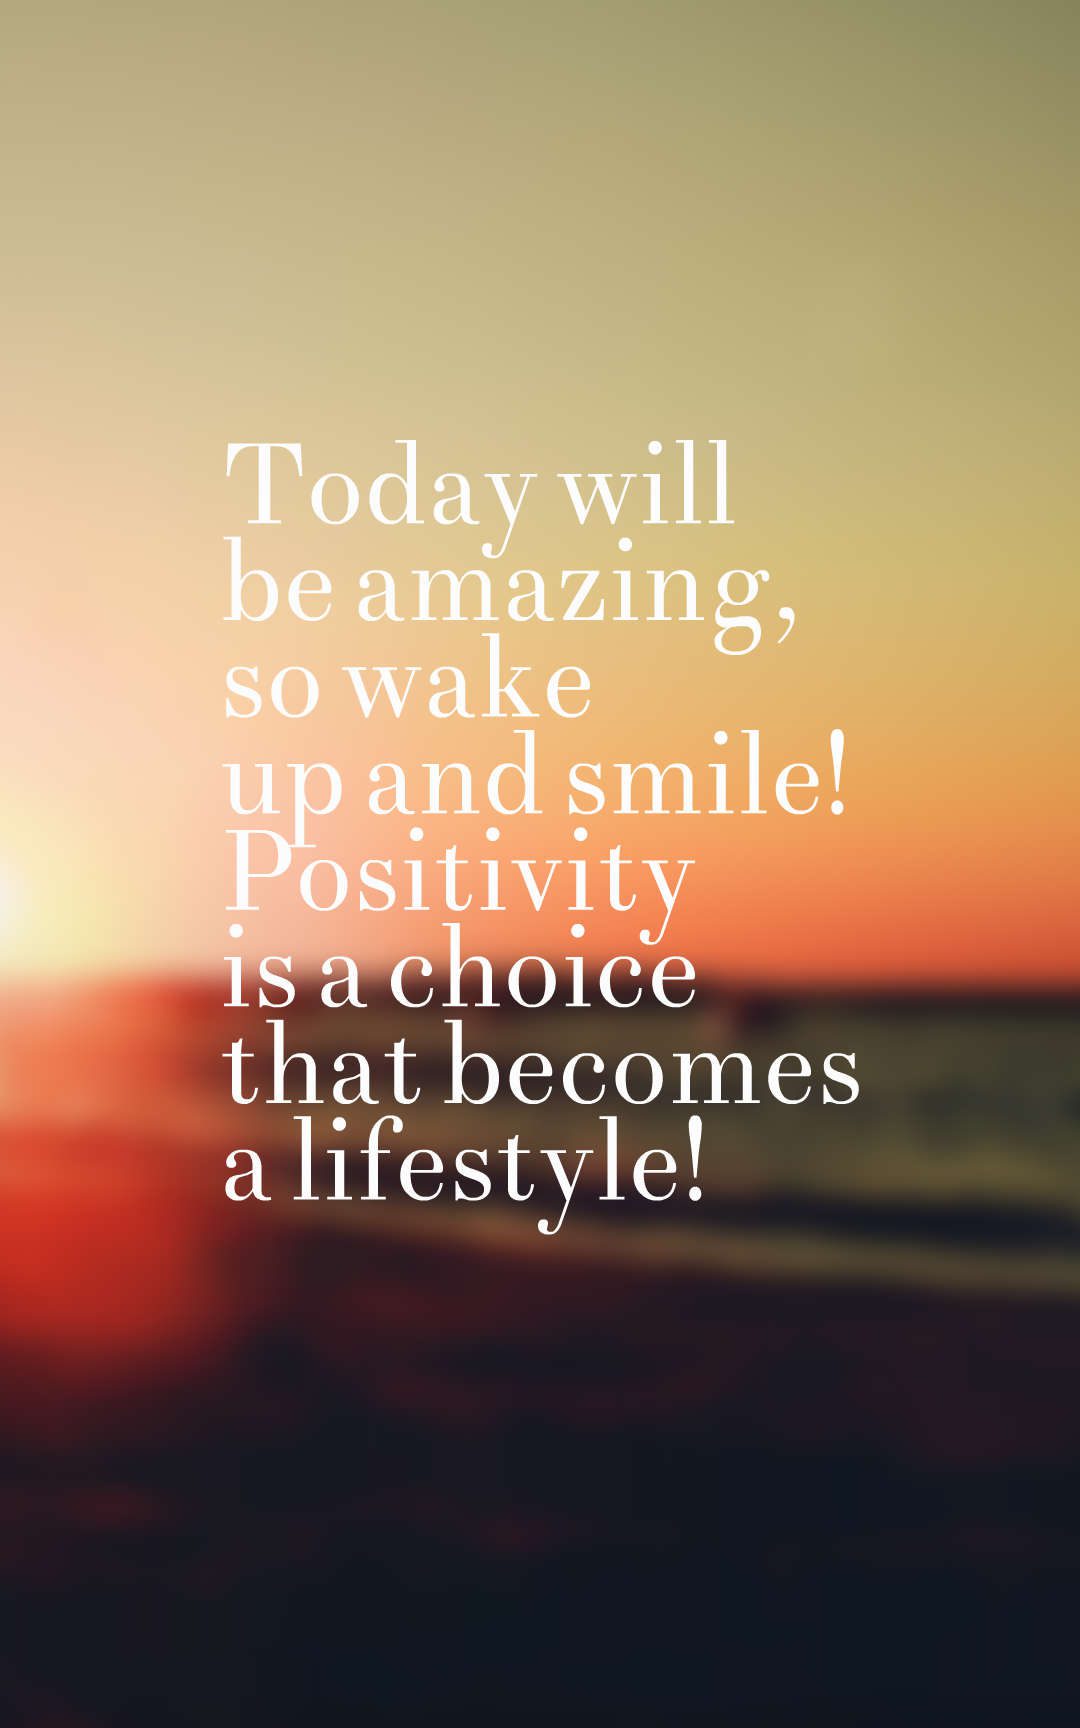 Today will be amazing, so wake up and smile! Positivity is a choice that becomes a lifestyle!